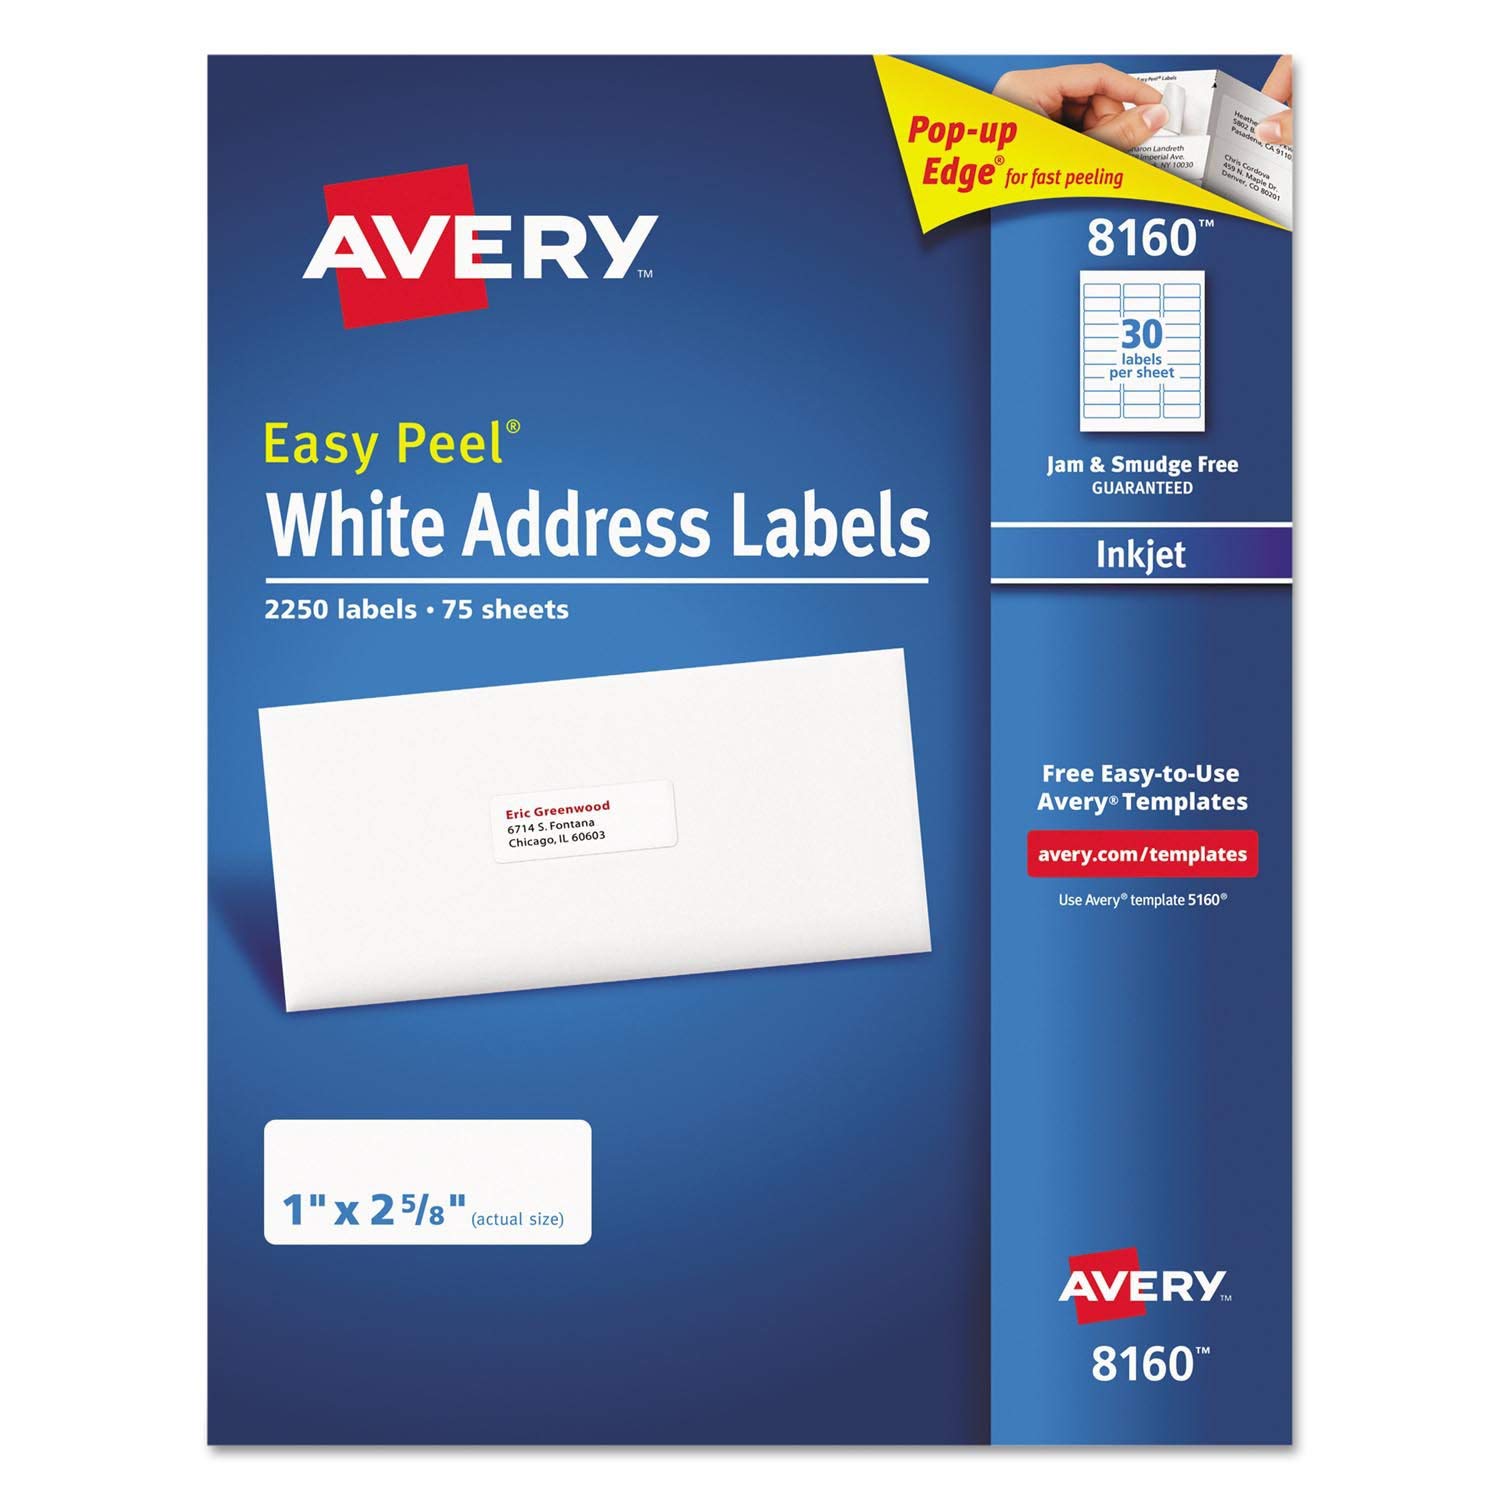 avery 5160 mail label google doc template